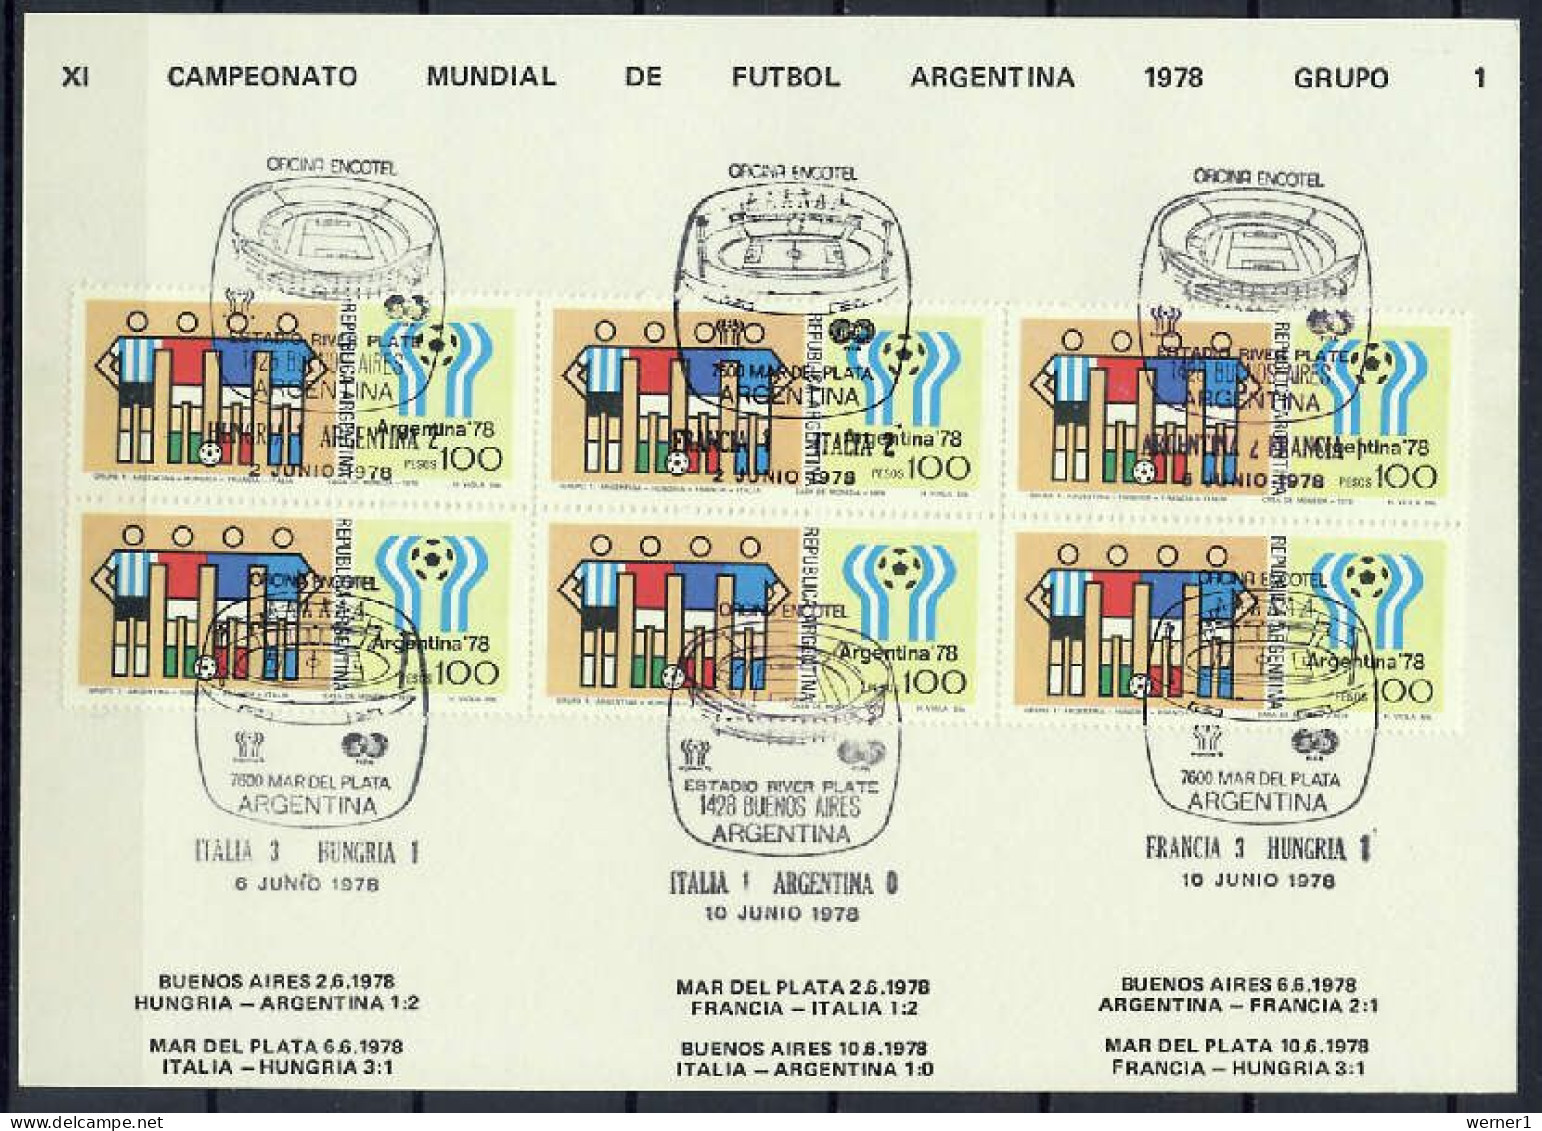 Argentina 1978 Football Soccer World Cup Commemorative Print With Group 1 Results - 1978 – Argentine